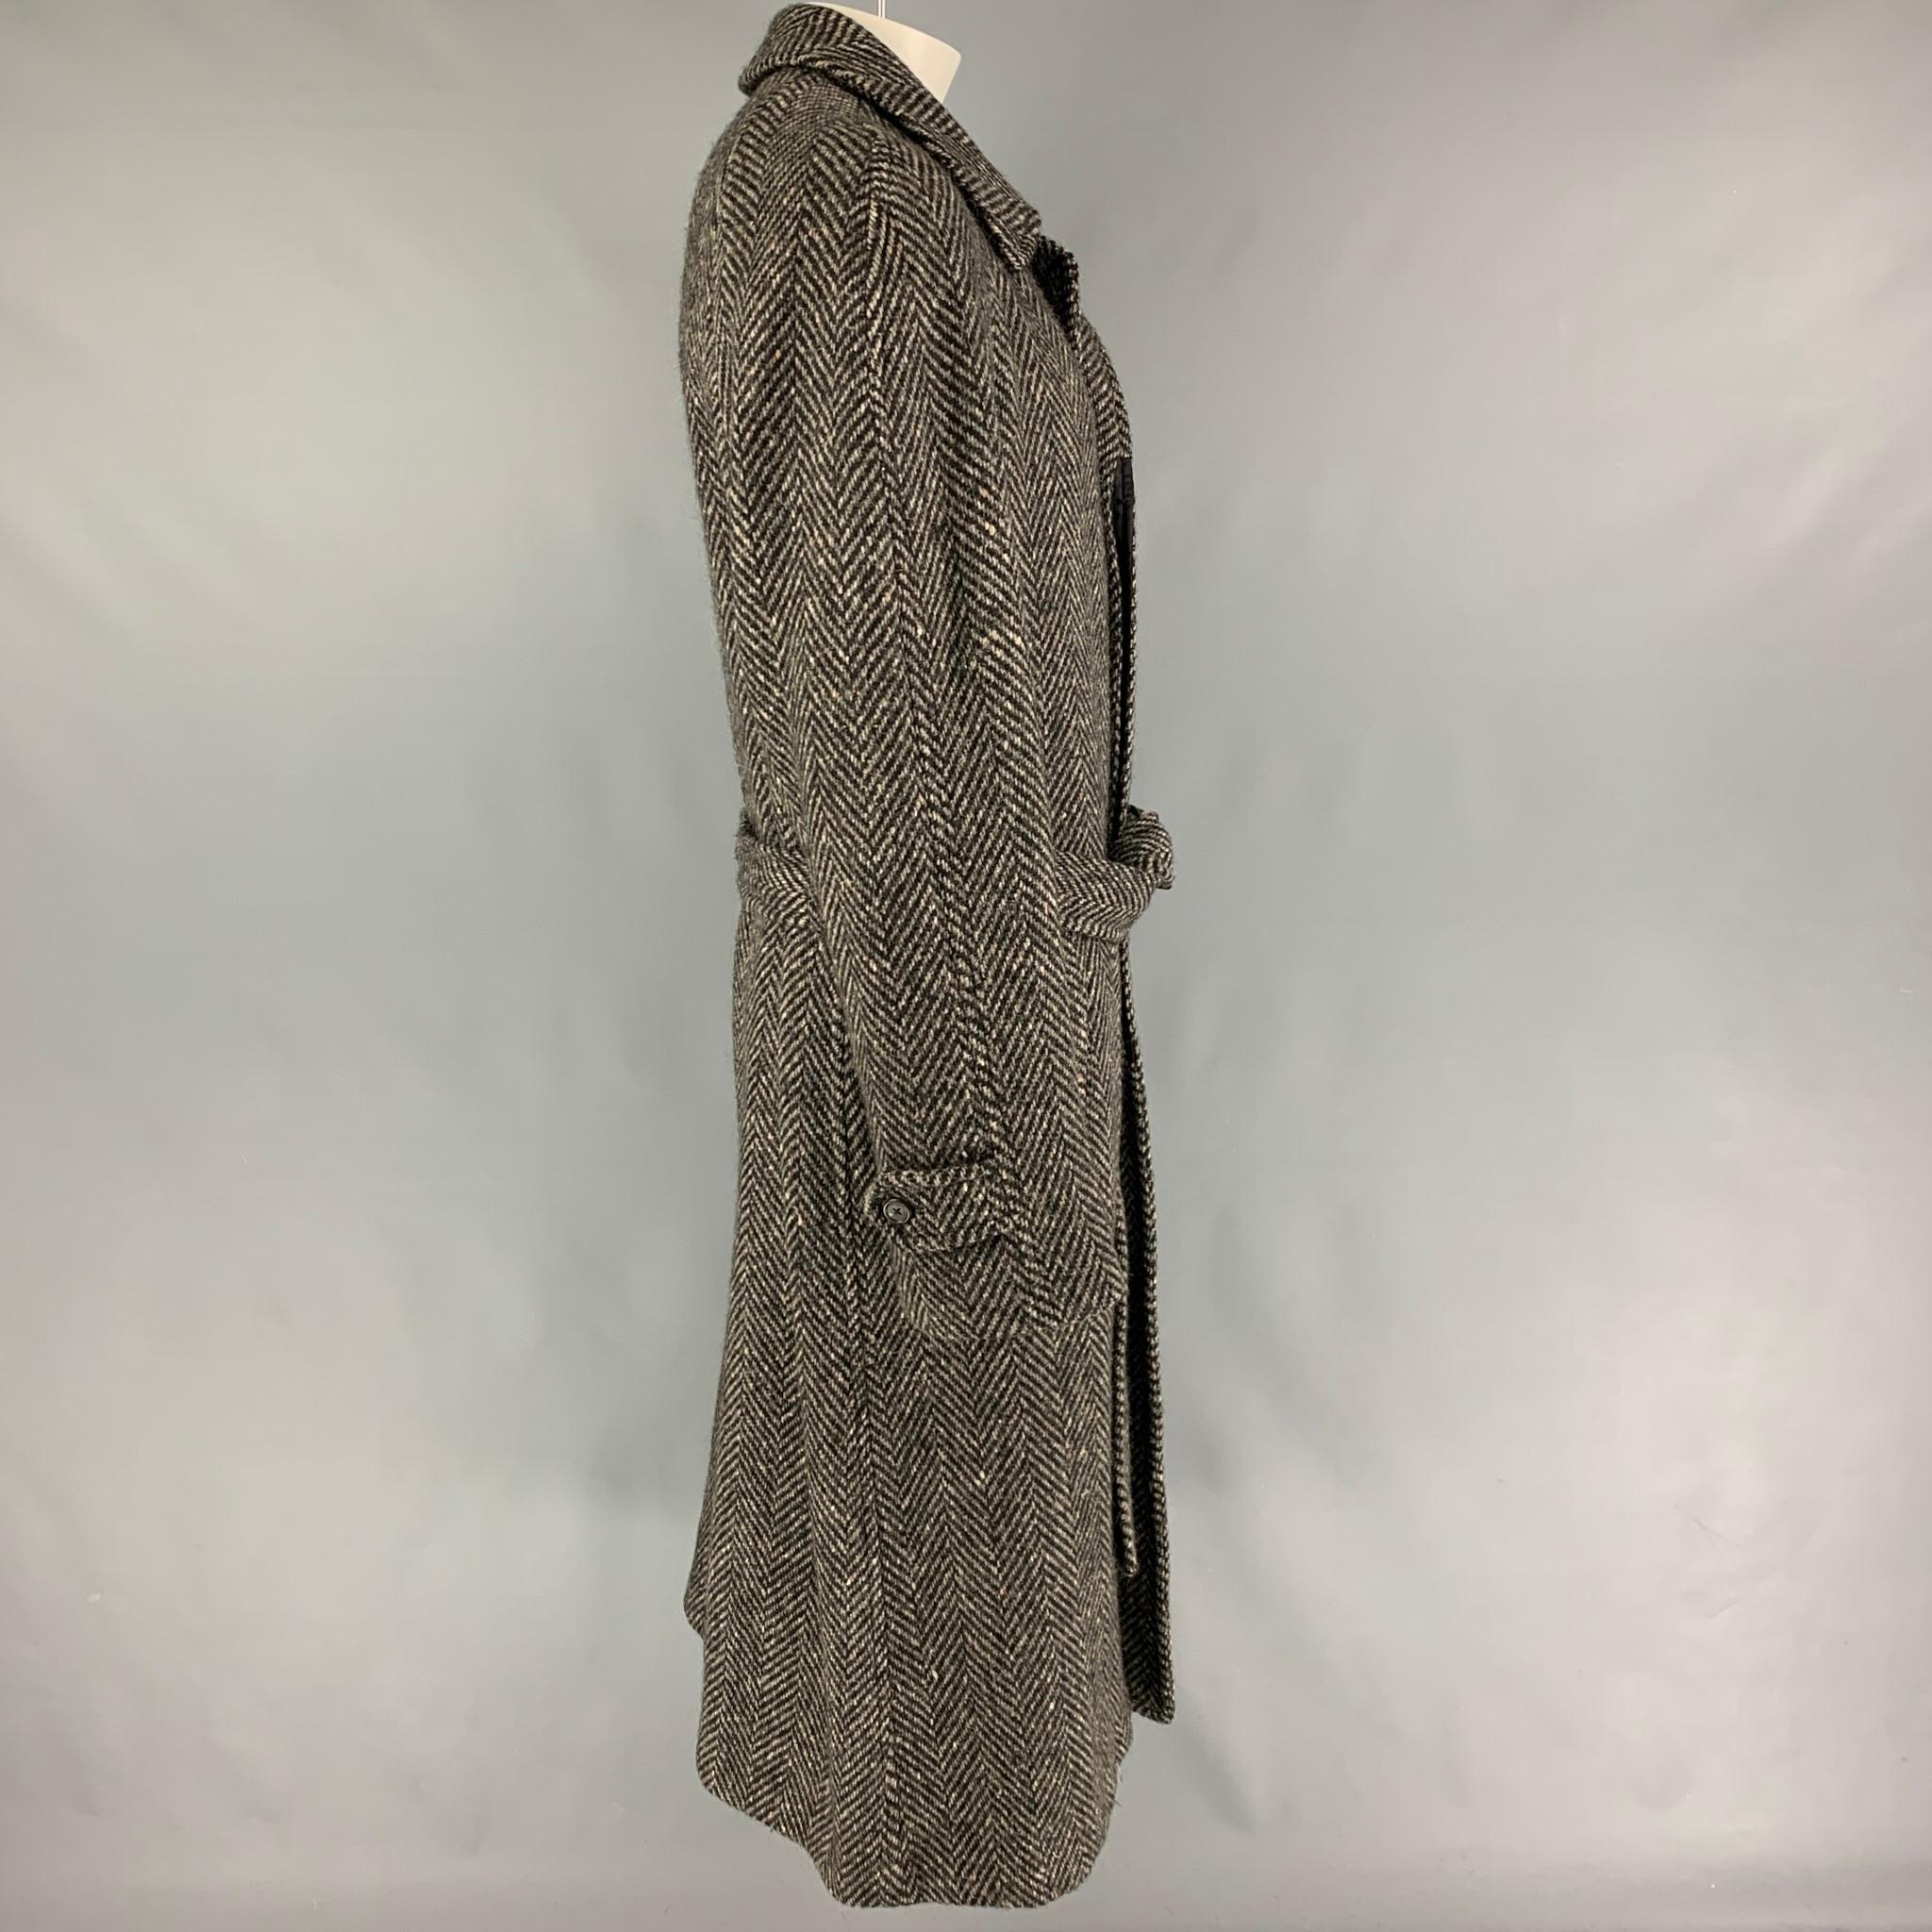 Vintage BURBERRYS for BARNEY'S NEW YORK coat comes in a black & grey herringbone wool with a full liner featuring a notch lapel, belted style, slit pockets, and back vent, and a buttoned closure. Made in USA. 

Very Good Pre-Owned Condition.
Marked: